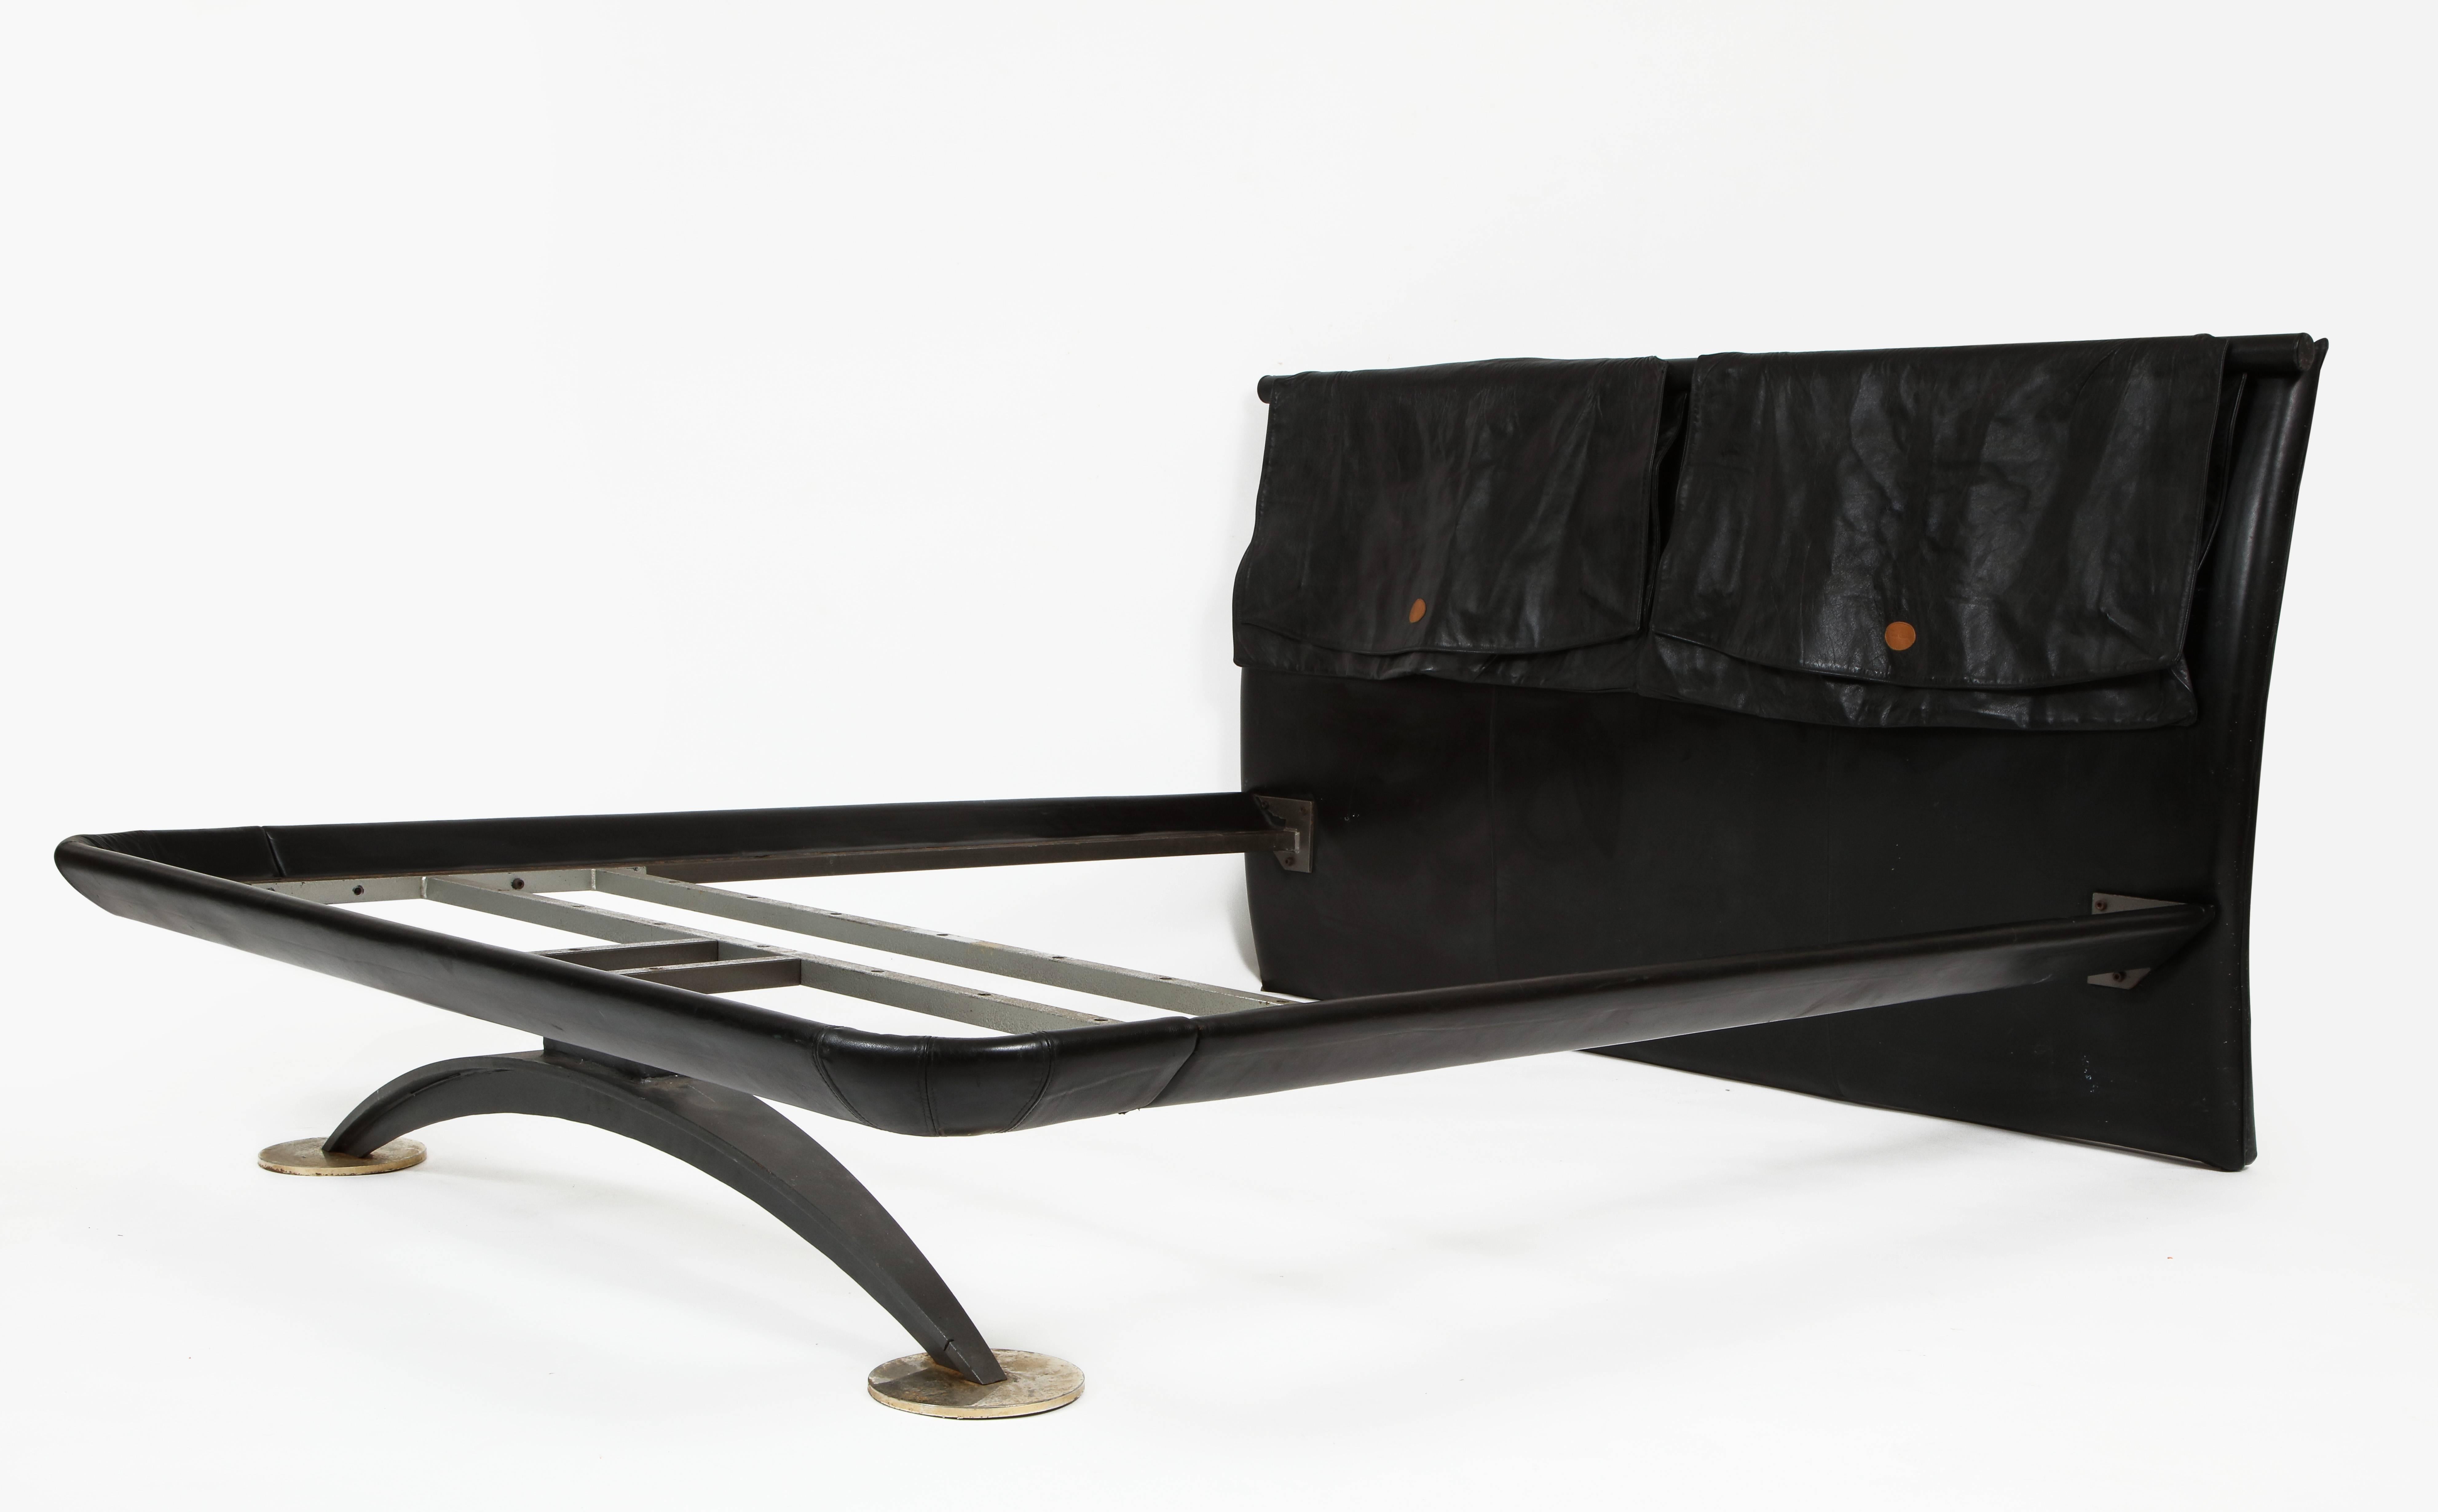 Pierre Cardin black leather bed bronze and iron base, 1970s-1980s. 

Rare and chic black leather and faux leather bed made by Pierre Cardin.
The headboard is faux leather, and there are two large leather pieces that wrap over the headboard that hold